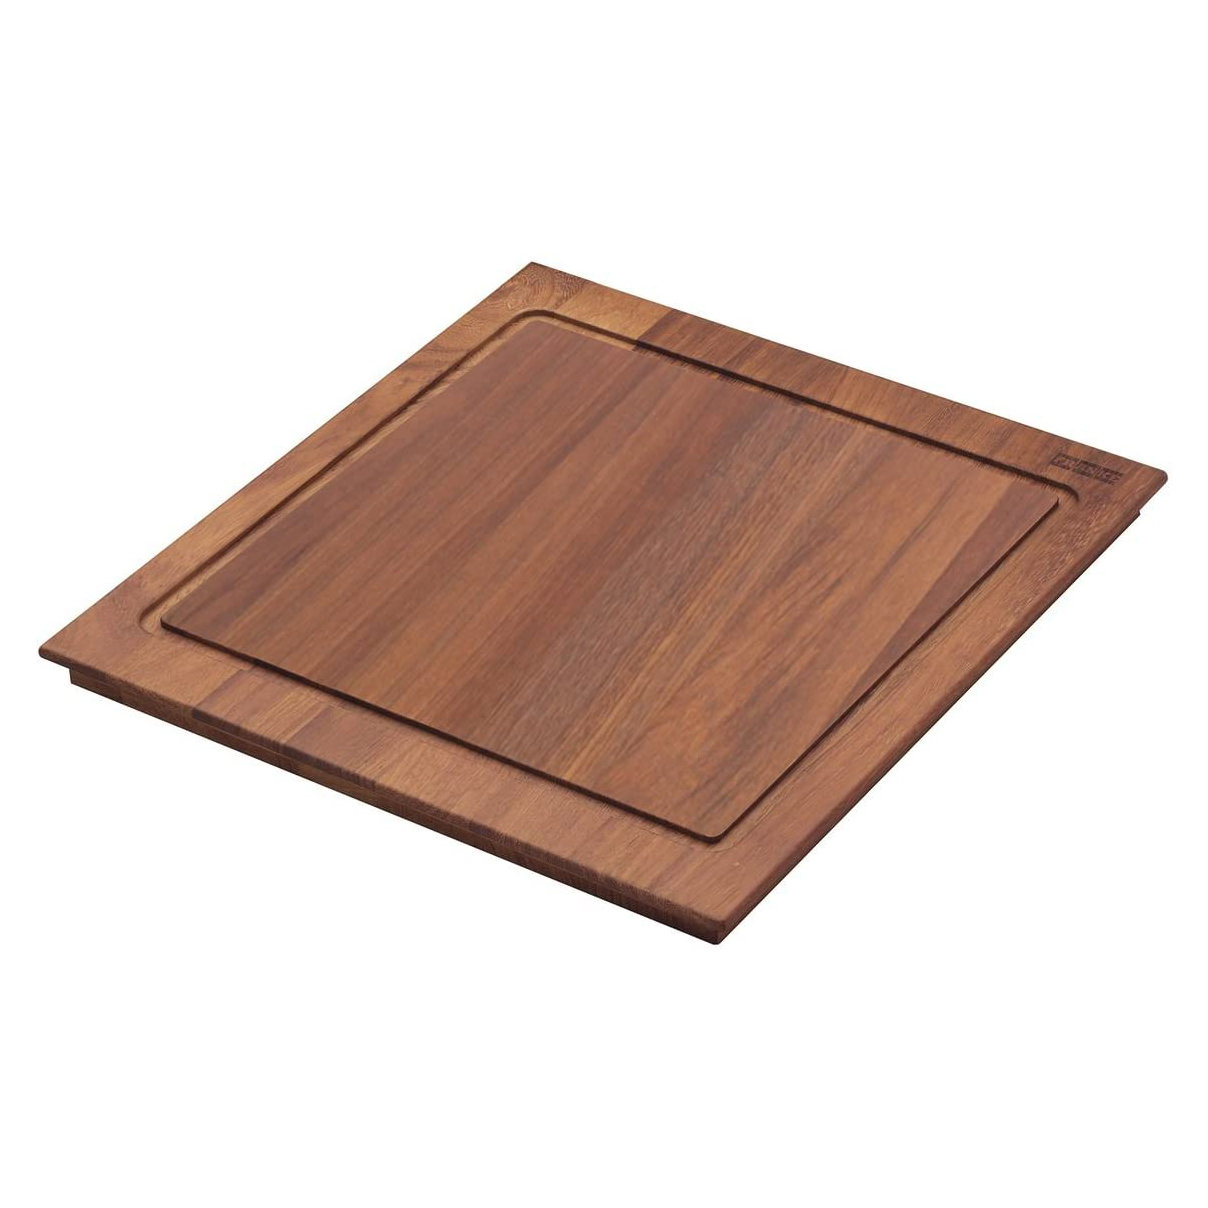 CUTTING BOARD 14-3/8X17-1/8 PX-40S SOLID WOOD